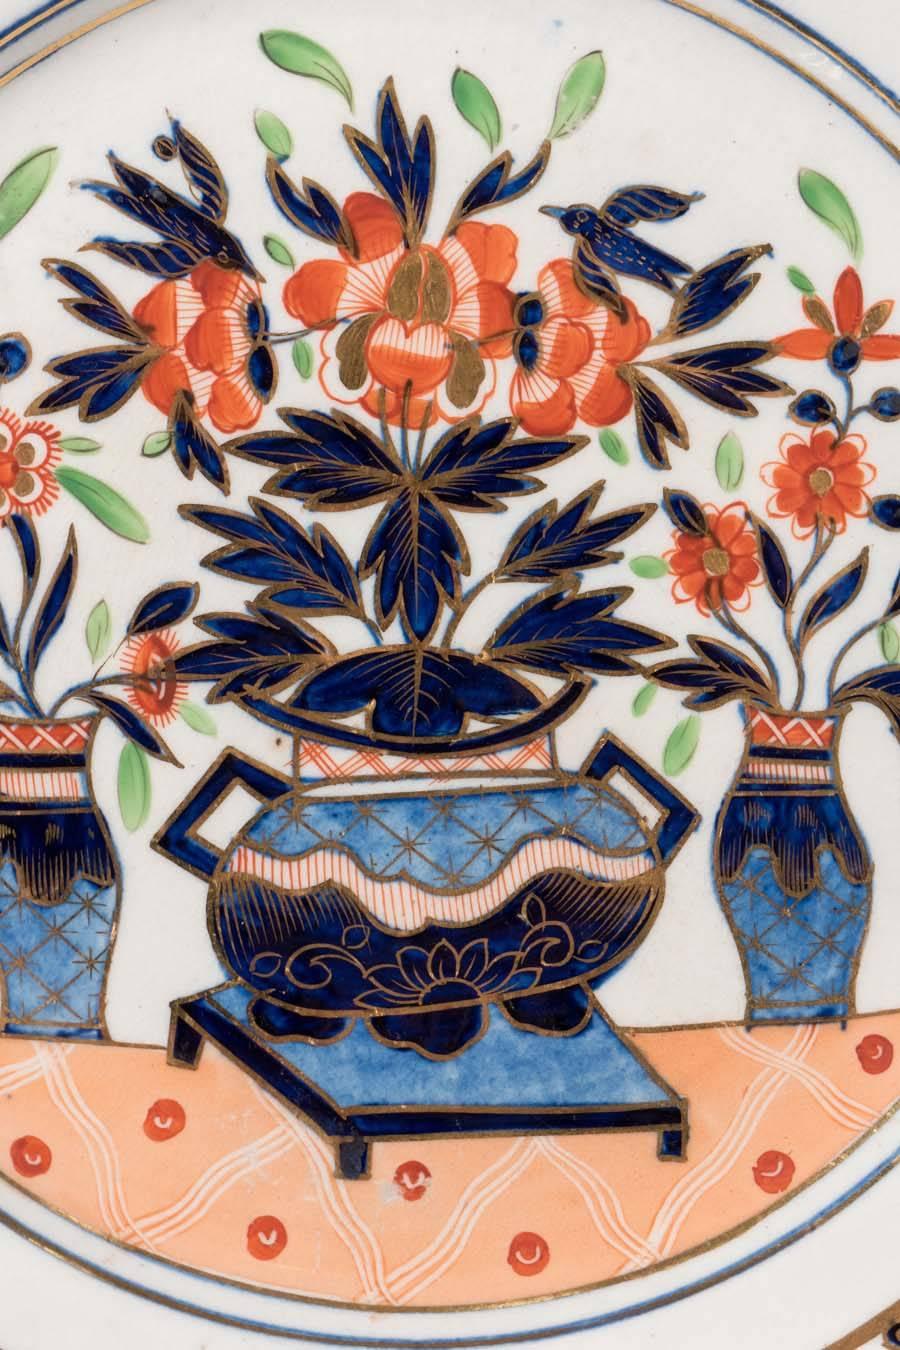 Set of 19th Century English Dishes in Imari Style with Cobalt Blue and Orange 1